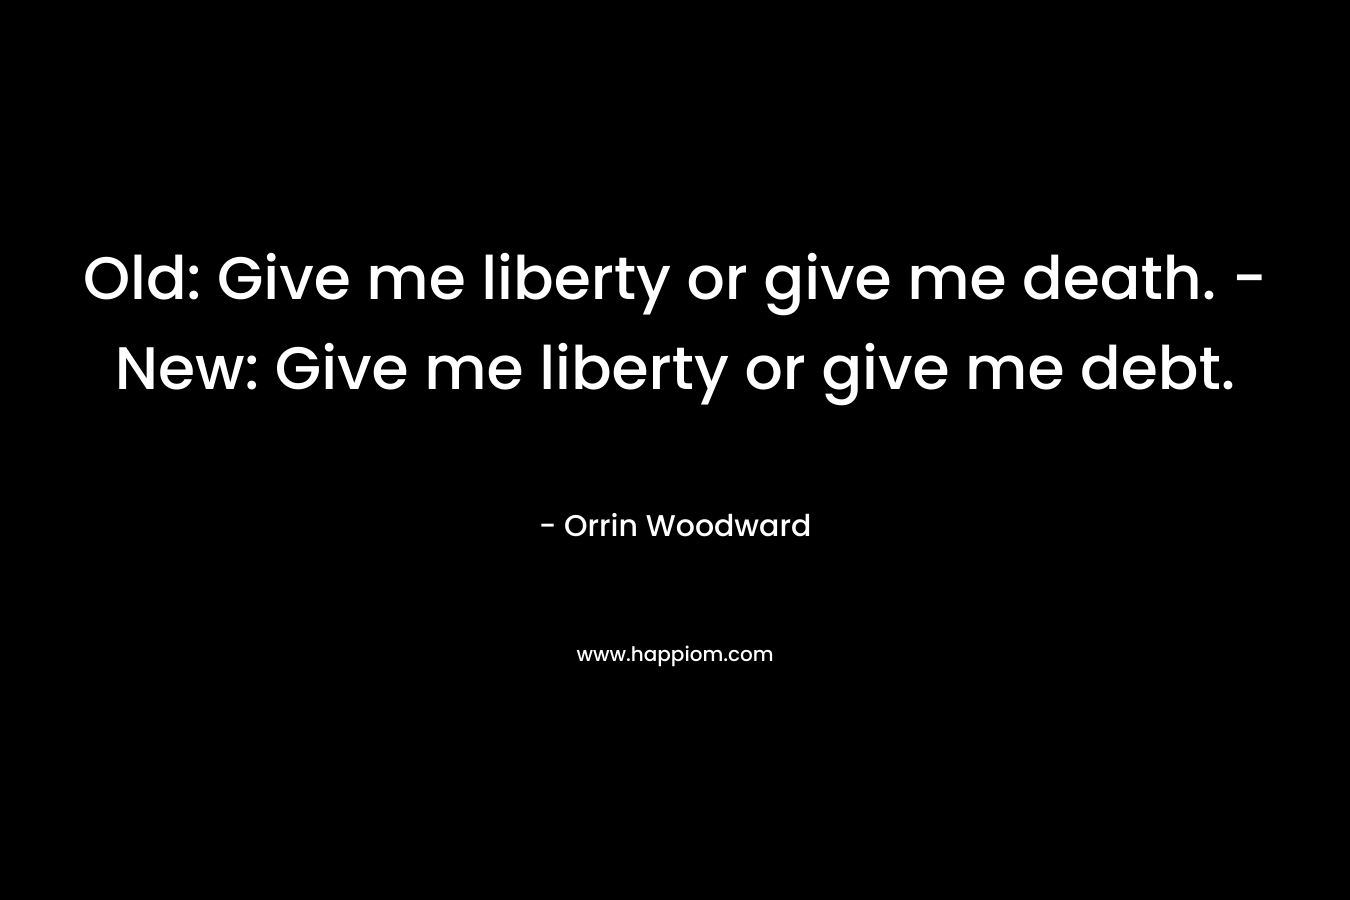 Old: Give me liberty or give me death. - New: Give me liberty or give me debt.